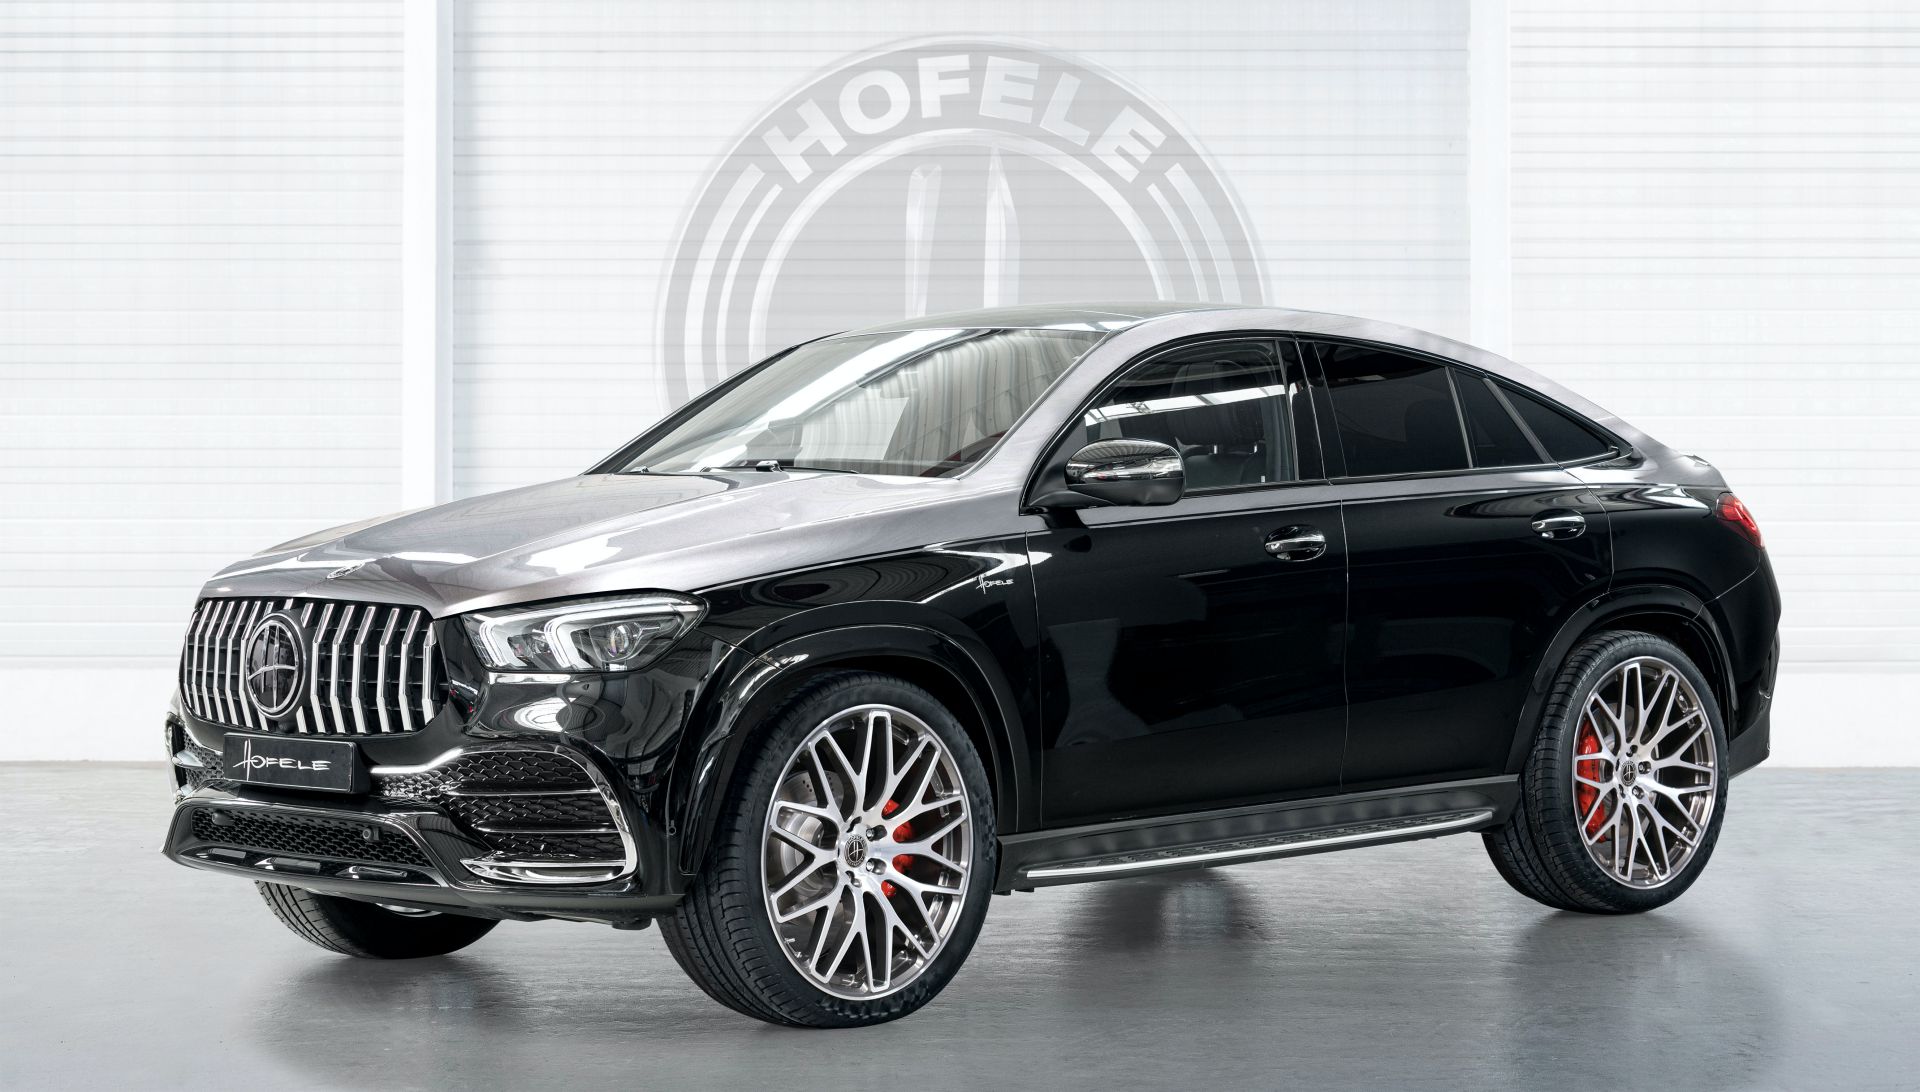 Hofele S Mercedes Gle Coupe Looks Like A Collab Between Maybach And Amg Carscoops